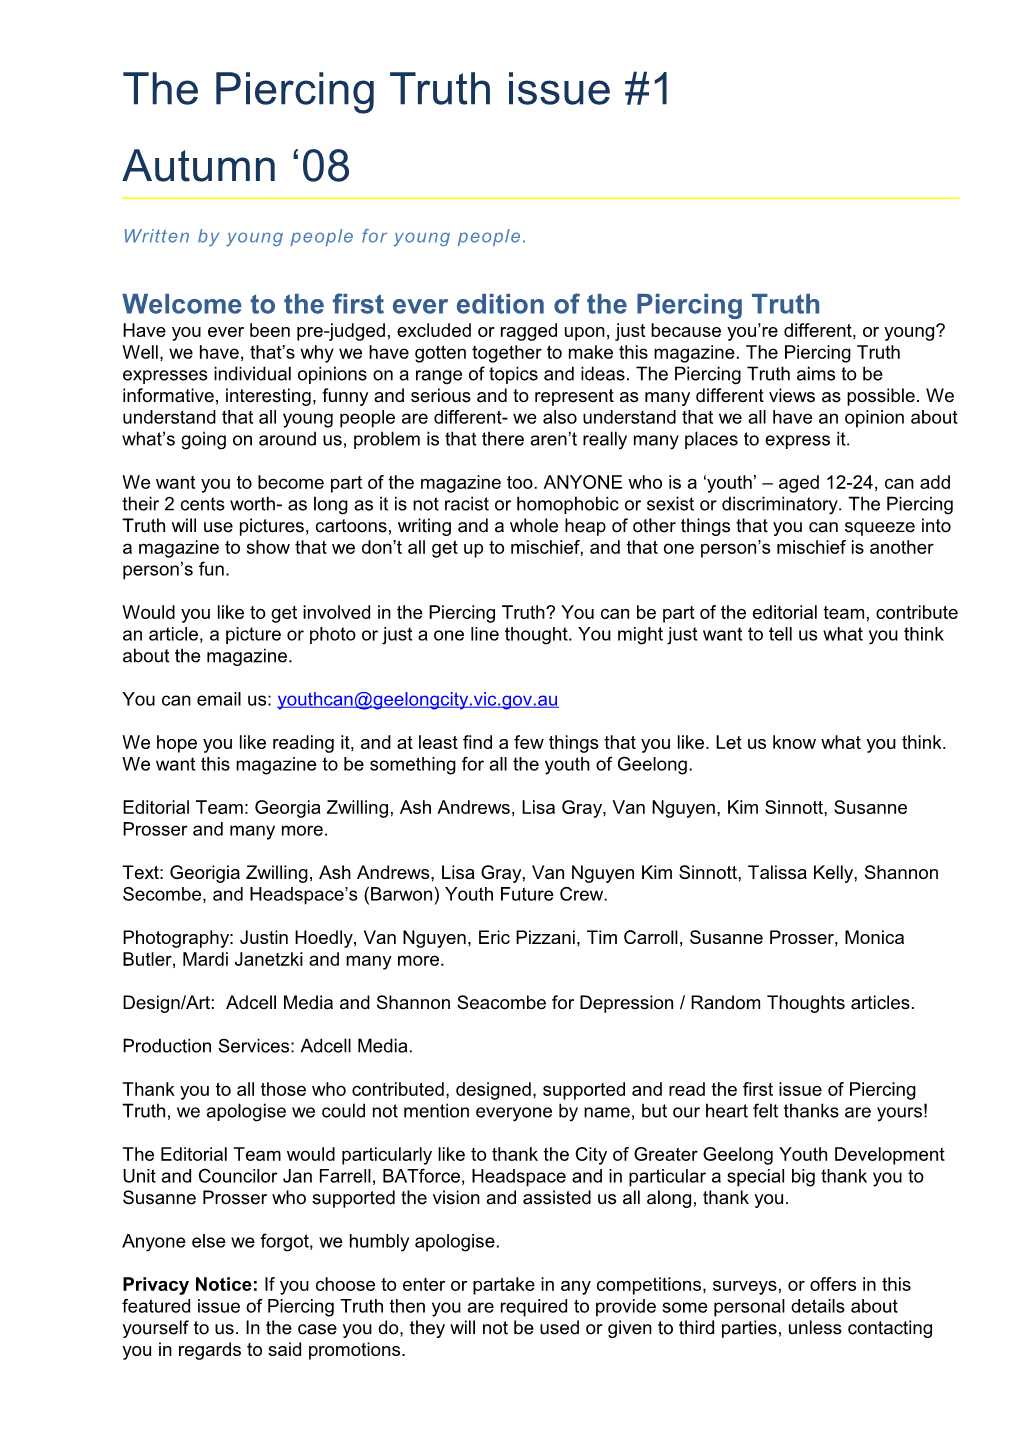 Welcome to the First Ever Edition of the Piercing Truth